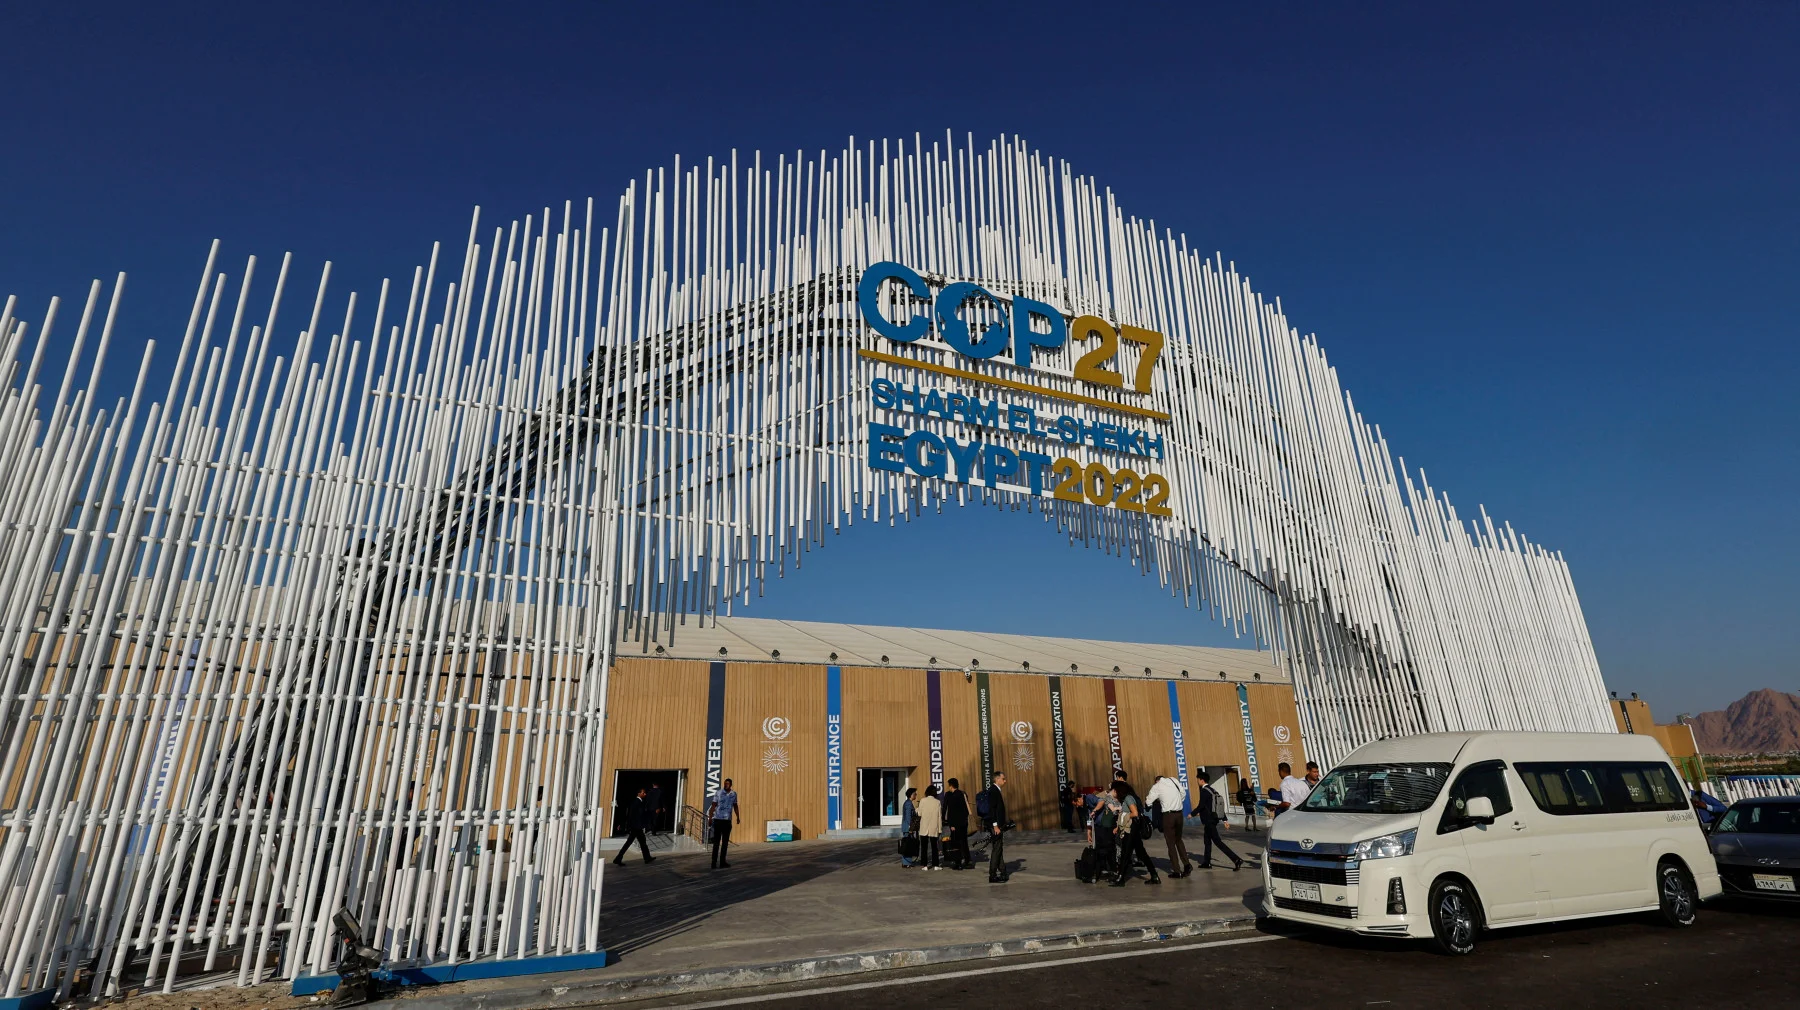 Participants walk outside of the Sharm El Sheikh International Convention Centre before the COP27 climate summit opening in Sharm el-Sheikh, Egypt November 7, 2022. (REUTERS/Mohammed Salem)